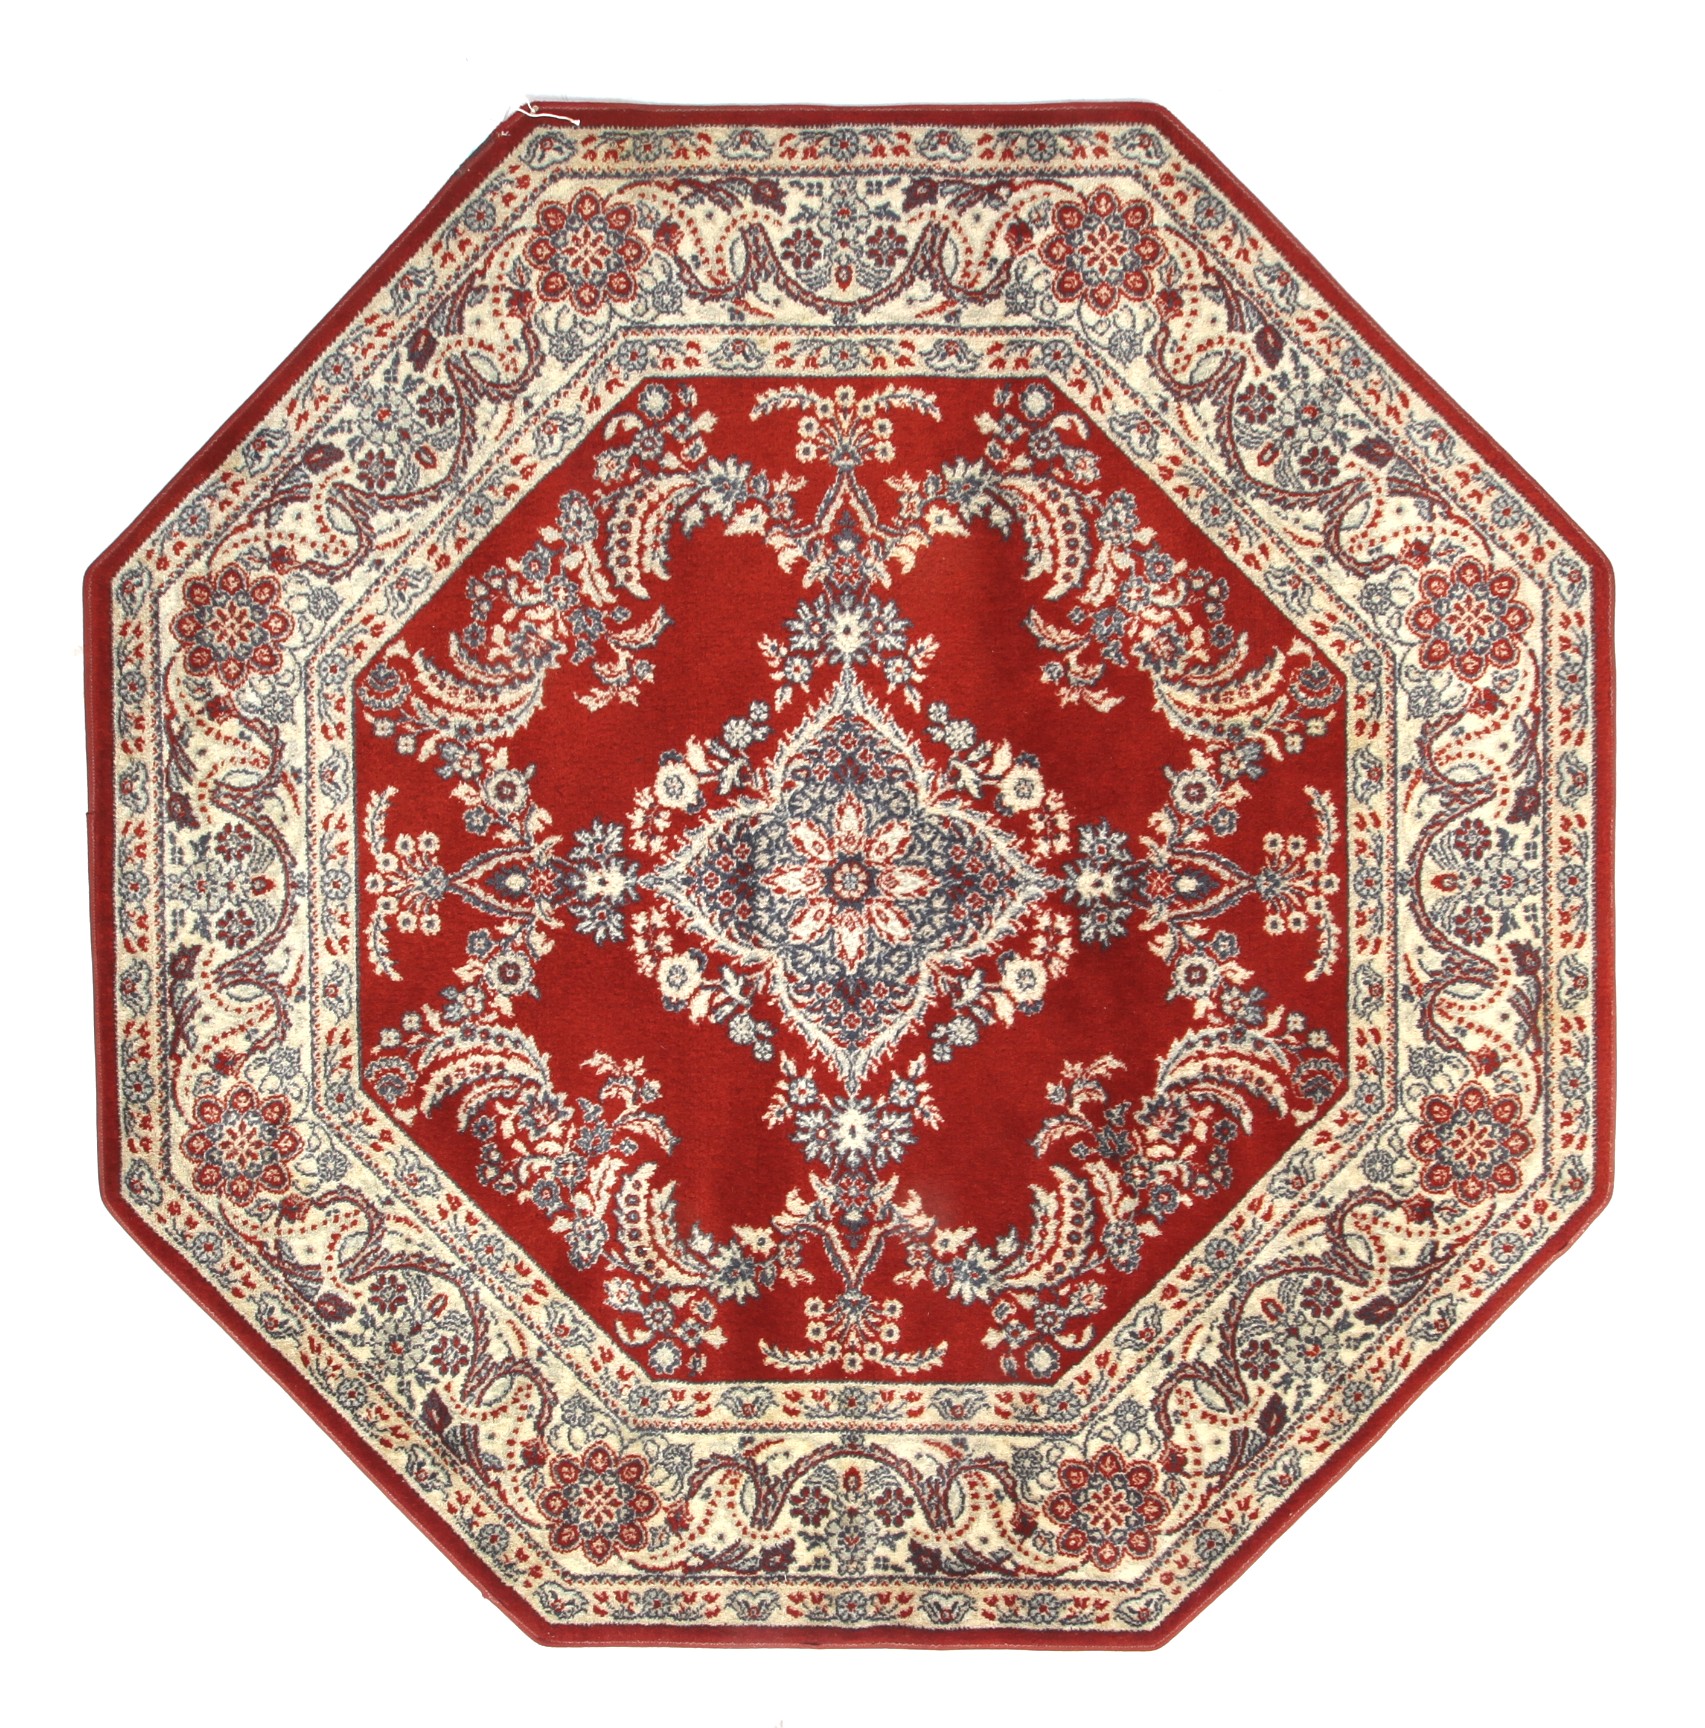 Two octagonal red ground wool rugs. - Image 2 of 4